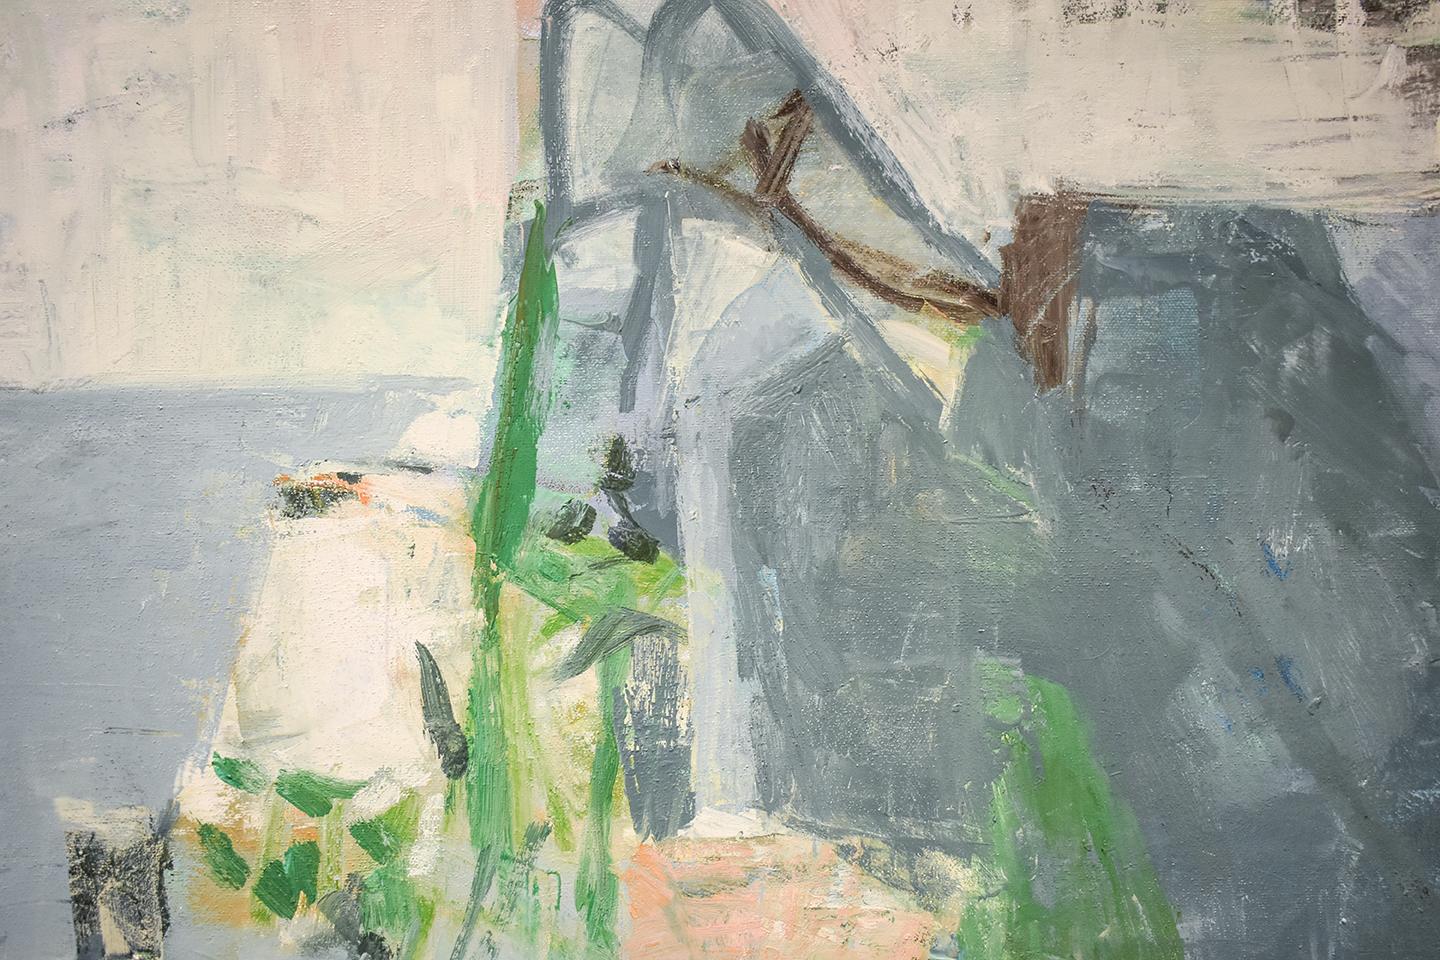 Square, abstract expressionist oil painting on canvas in light blue, paynes grey, periwinkle blue and green against a pale grey background with accents of peach
'Arrow' by Jenny Nelson
Oil on canvas, made in 2019
30 x 30 x 2 inches unframed 
sturdy